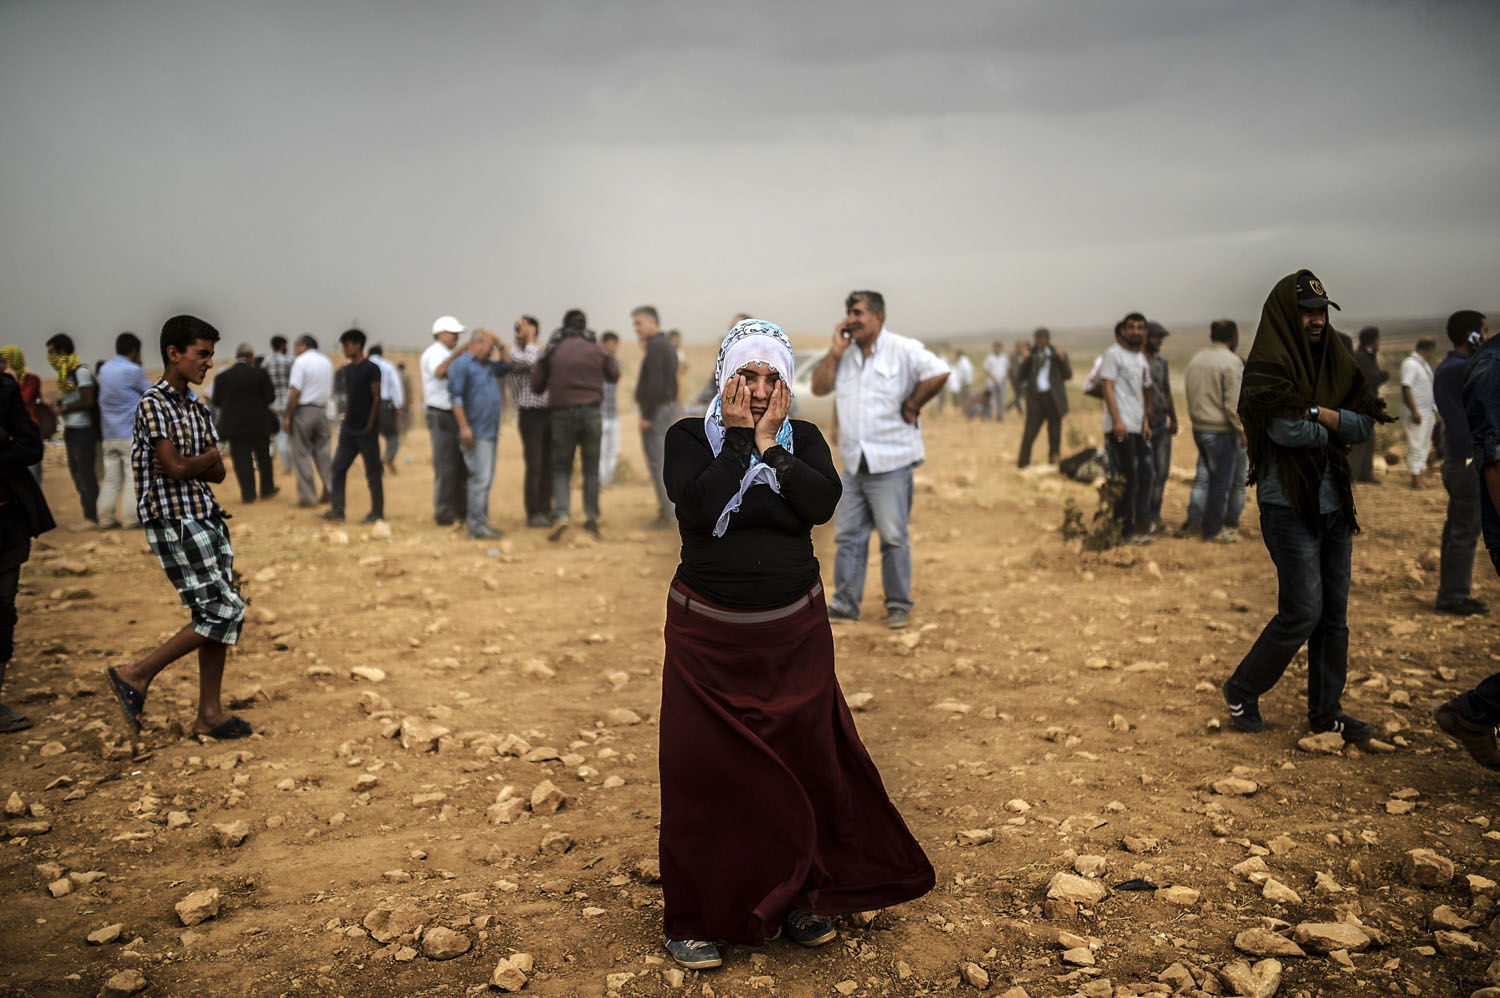 A Syrian Kurdish woman wipes her eyes during a dust storm on a hill where she and others stand watching clashes between jihadists of the Islamic State and Kurdish fighters, at Swedi village some 6 miles west of Suruc in Sanliurfa province, on Sept. 24, 2014.